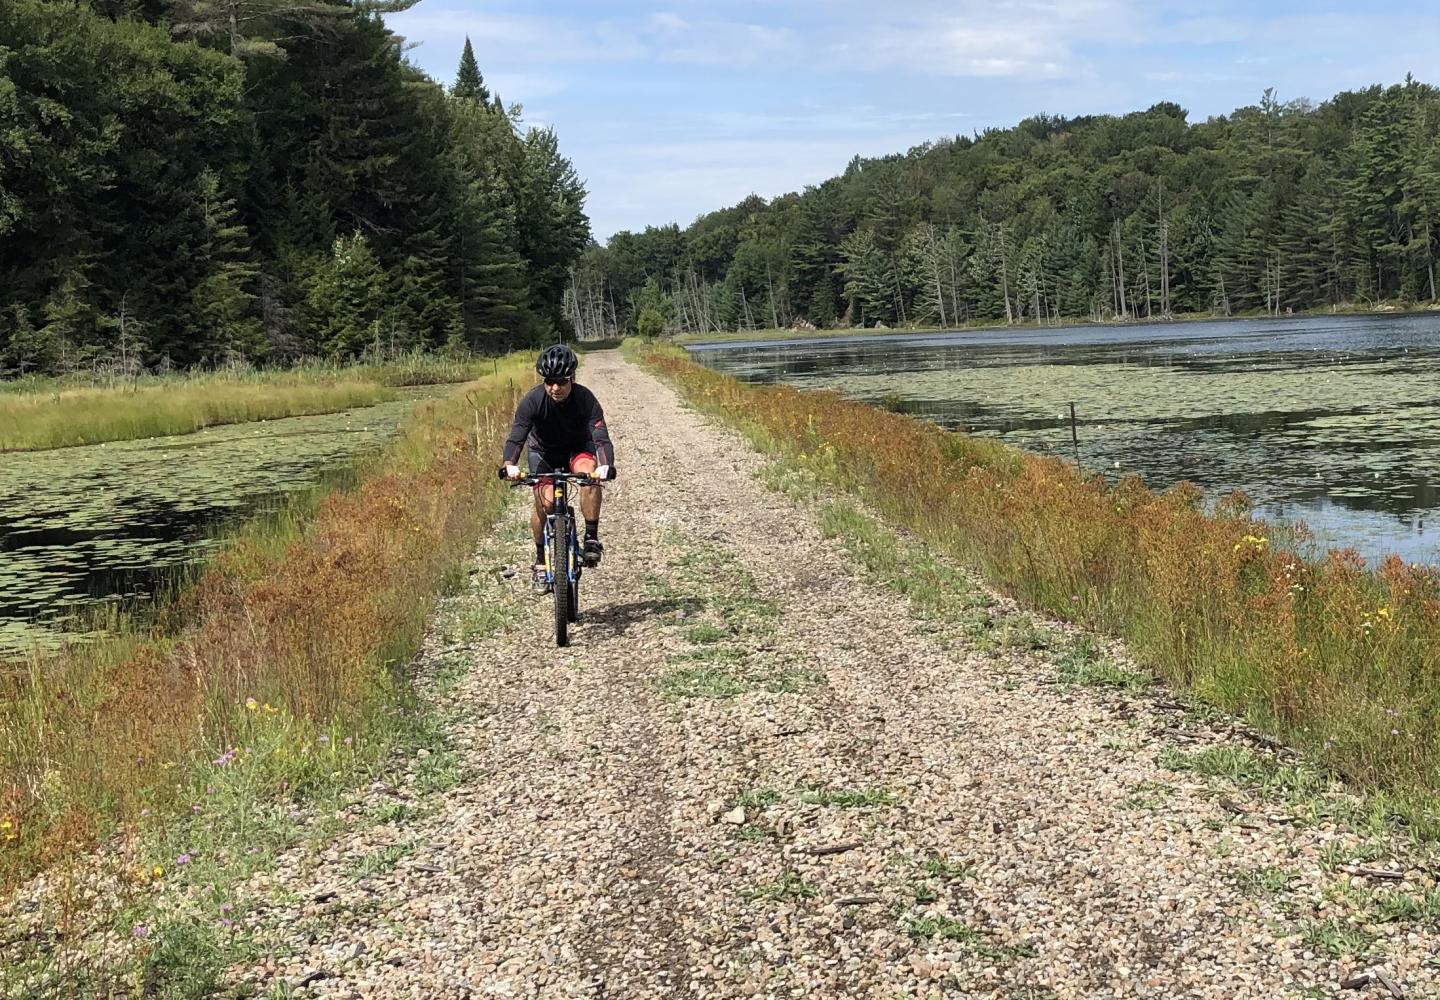 Adirondack Rail Trail provides opportunities to park and ride